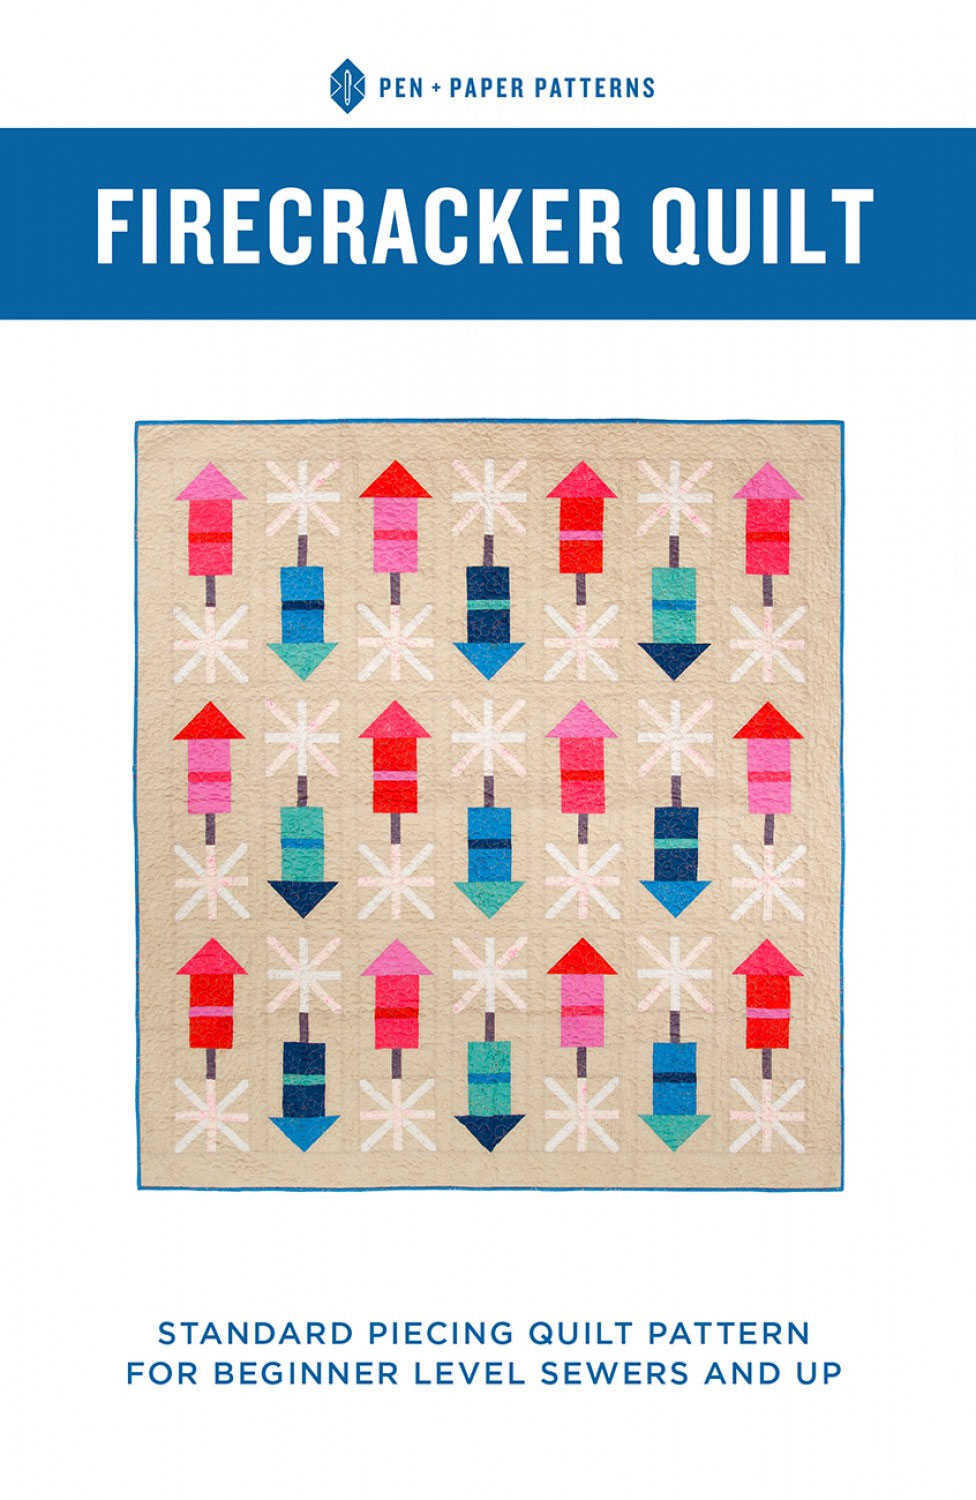 Firecracker-quilt-sewing-pattern-from-Pen-plus-paper-patterns-front